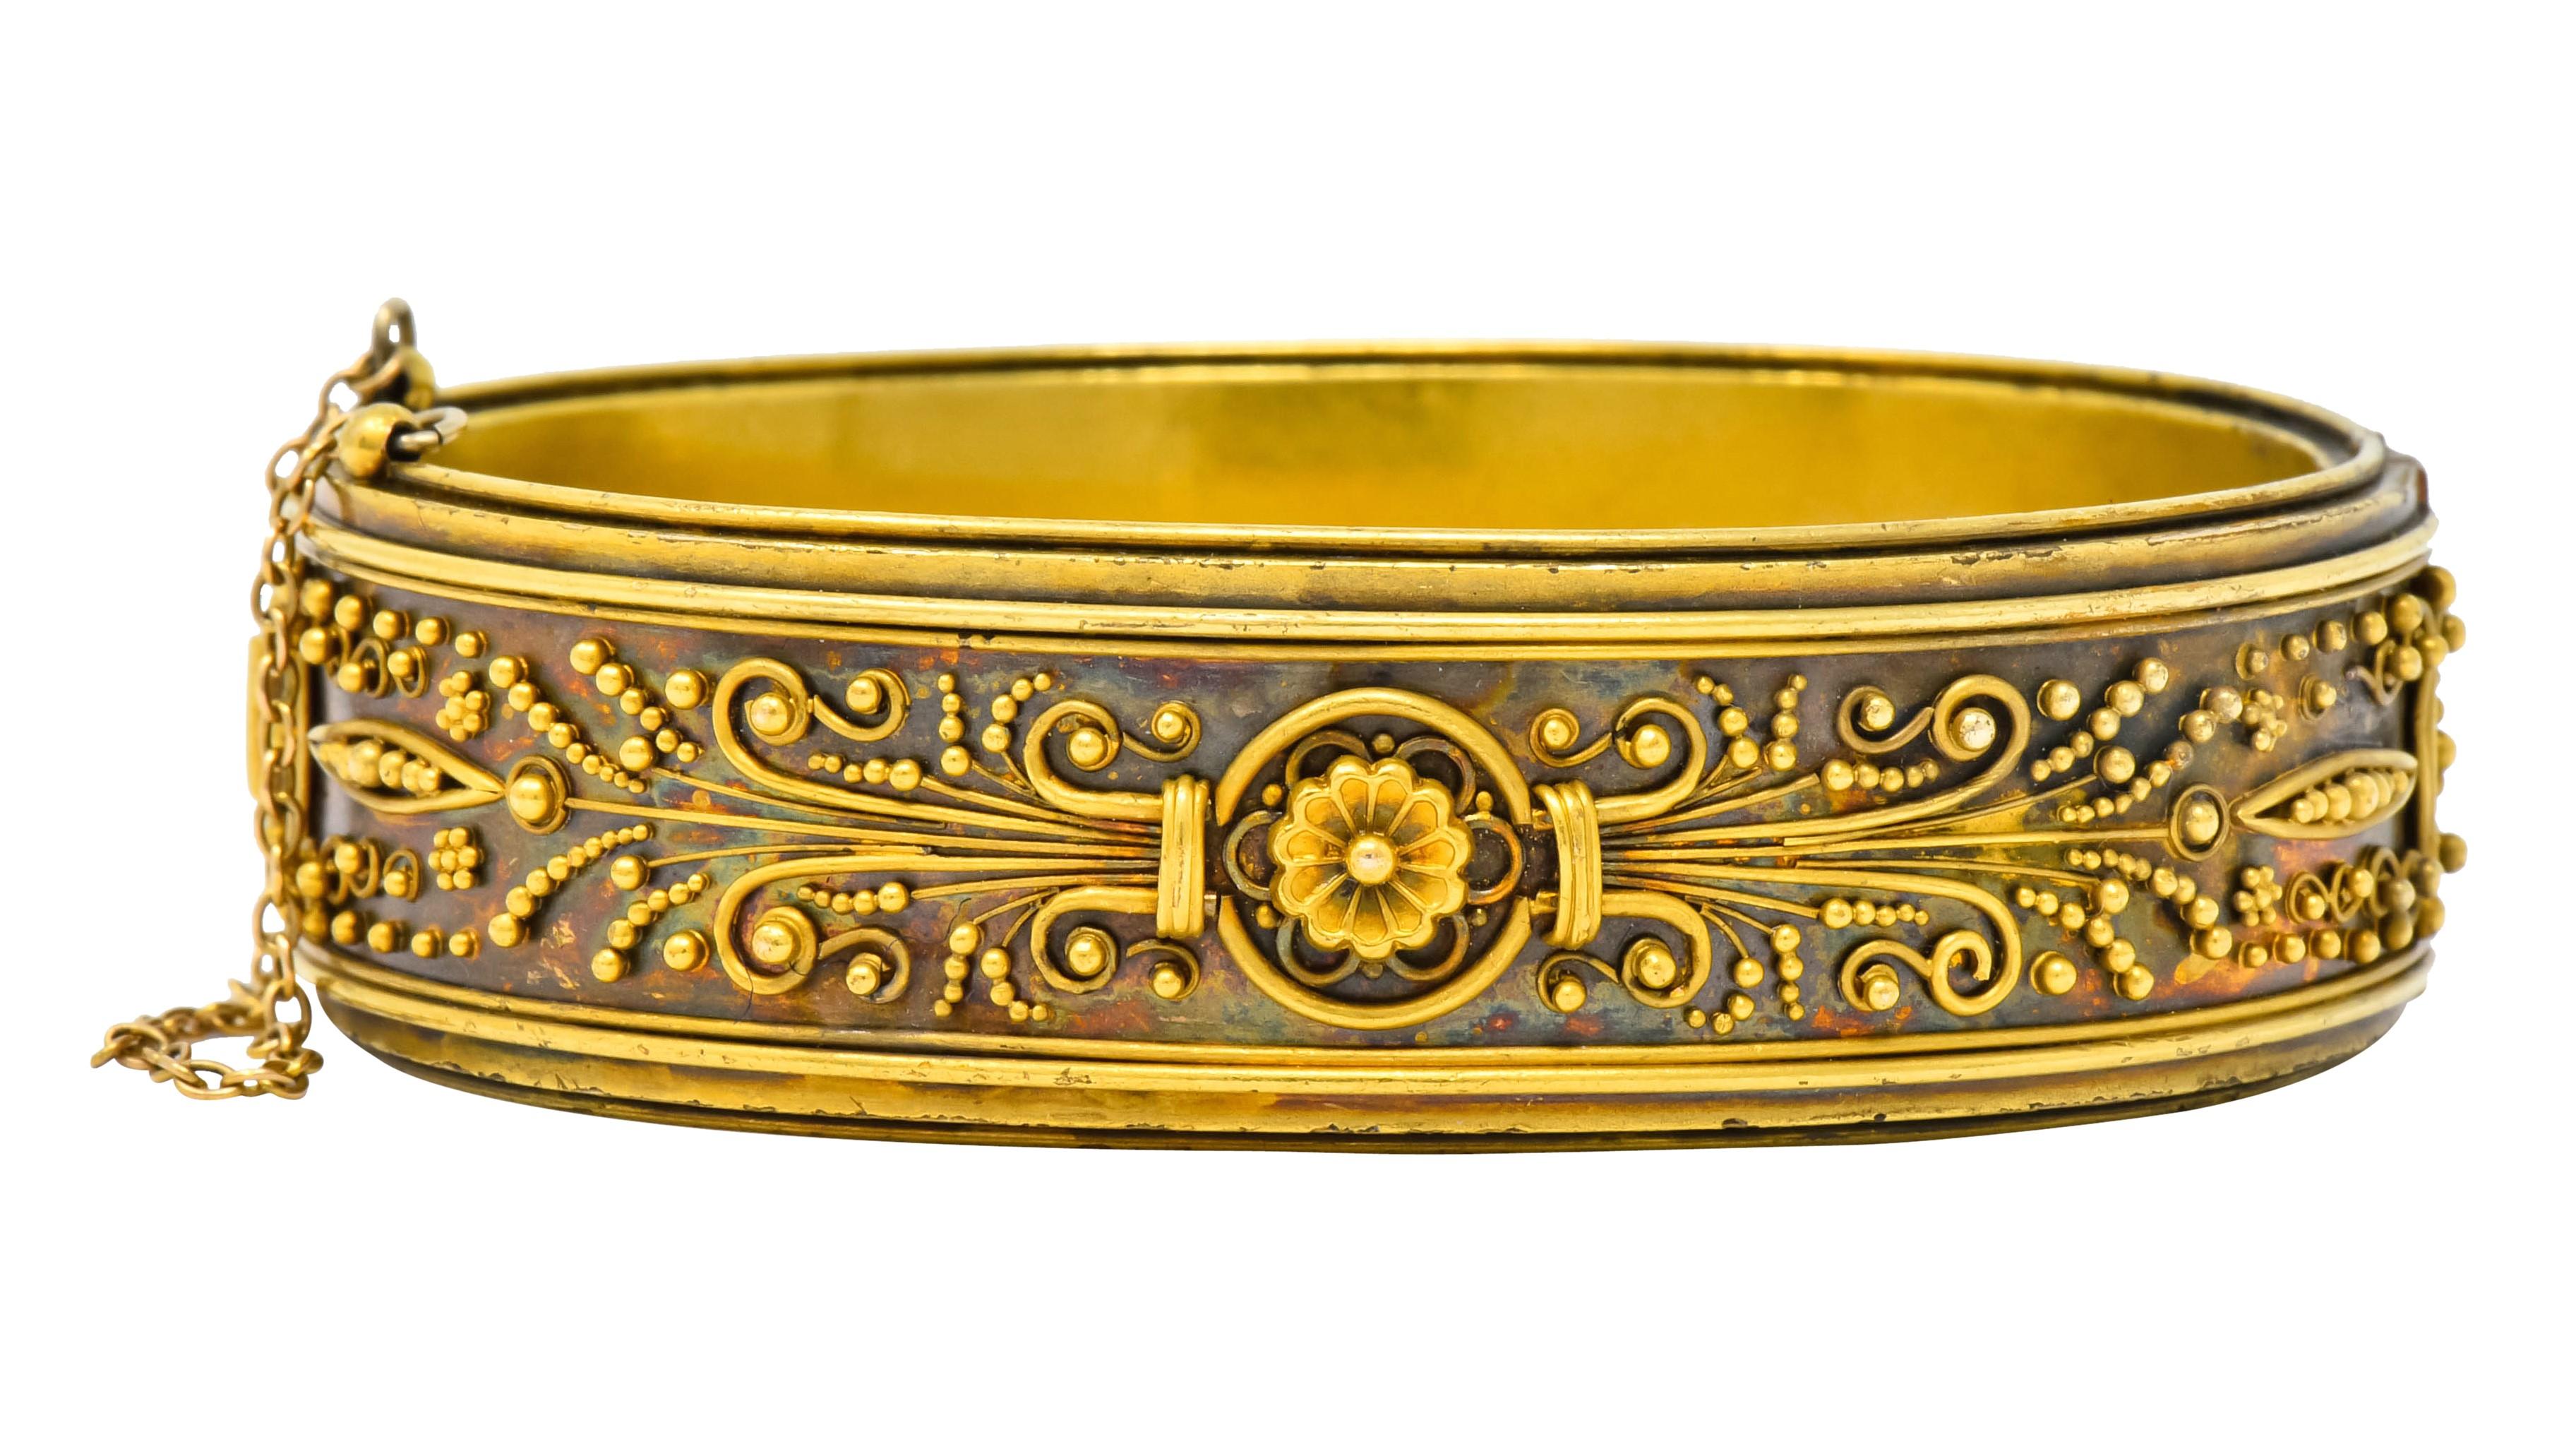 Bangle style bracelet centering a scalloped flower on each side flanked by stylized wheat motif

With deeply grooved edges and gold bead detail throughout

Hinged with concealed clasp and safety chain

With dated inscription

Tested as 14 karat